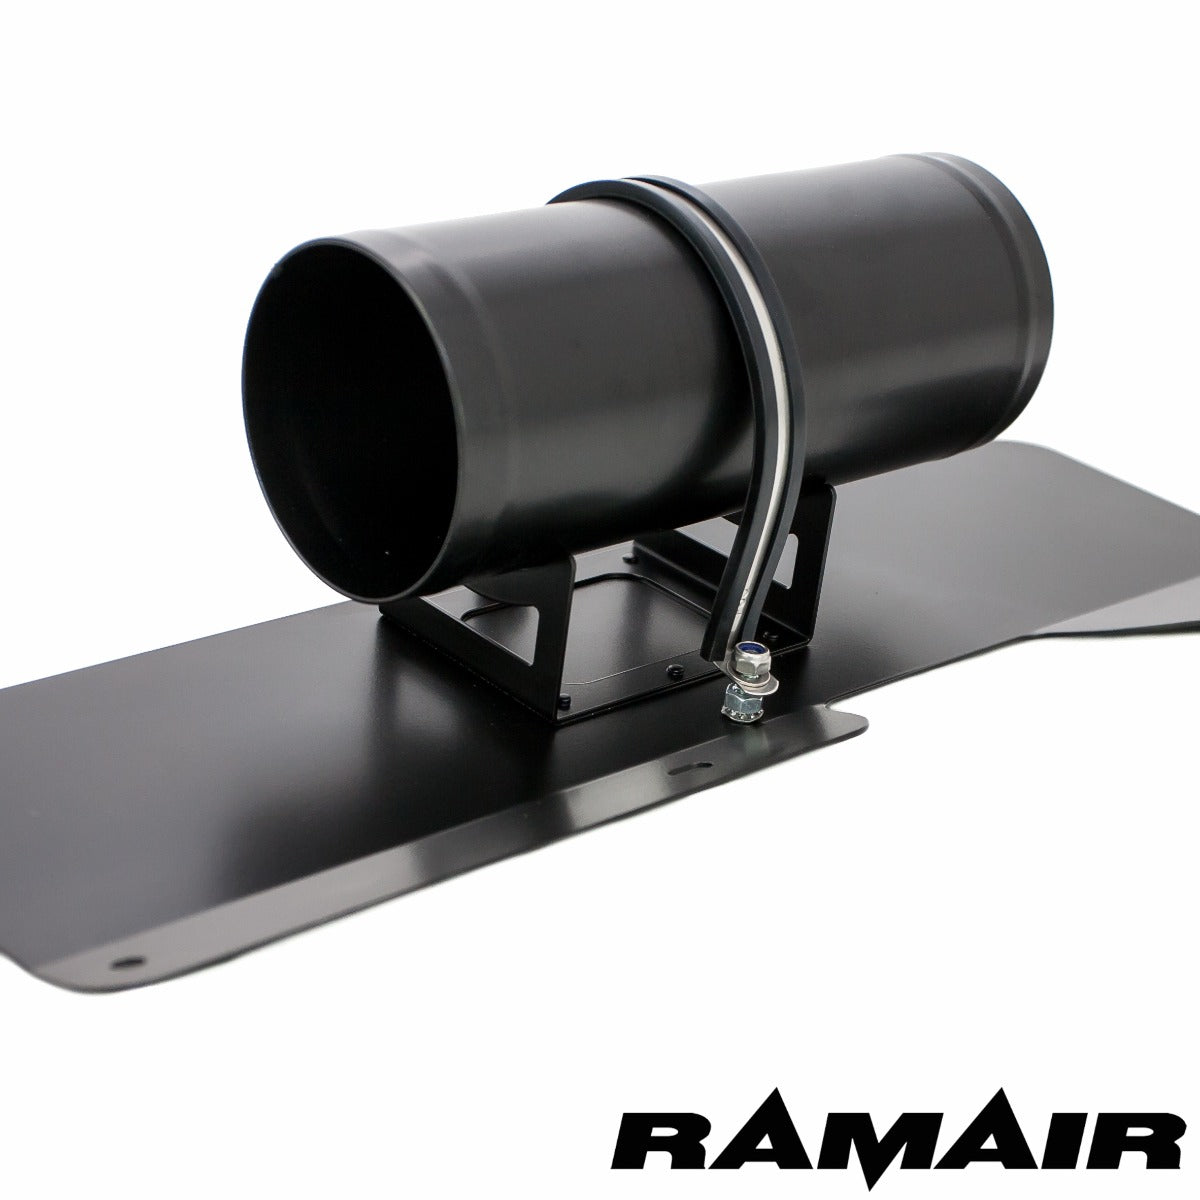 Ramair Stage 2 Oversized Induction Kit for Audi A3 8P 2.0 TFSI (03-12)